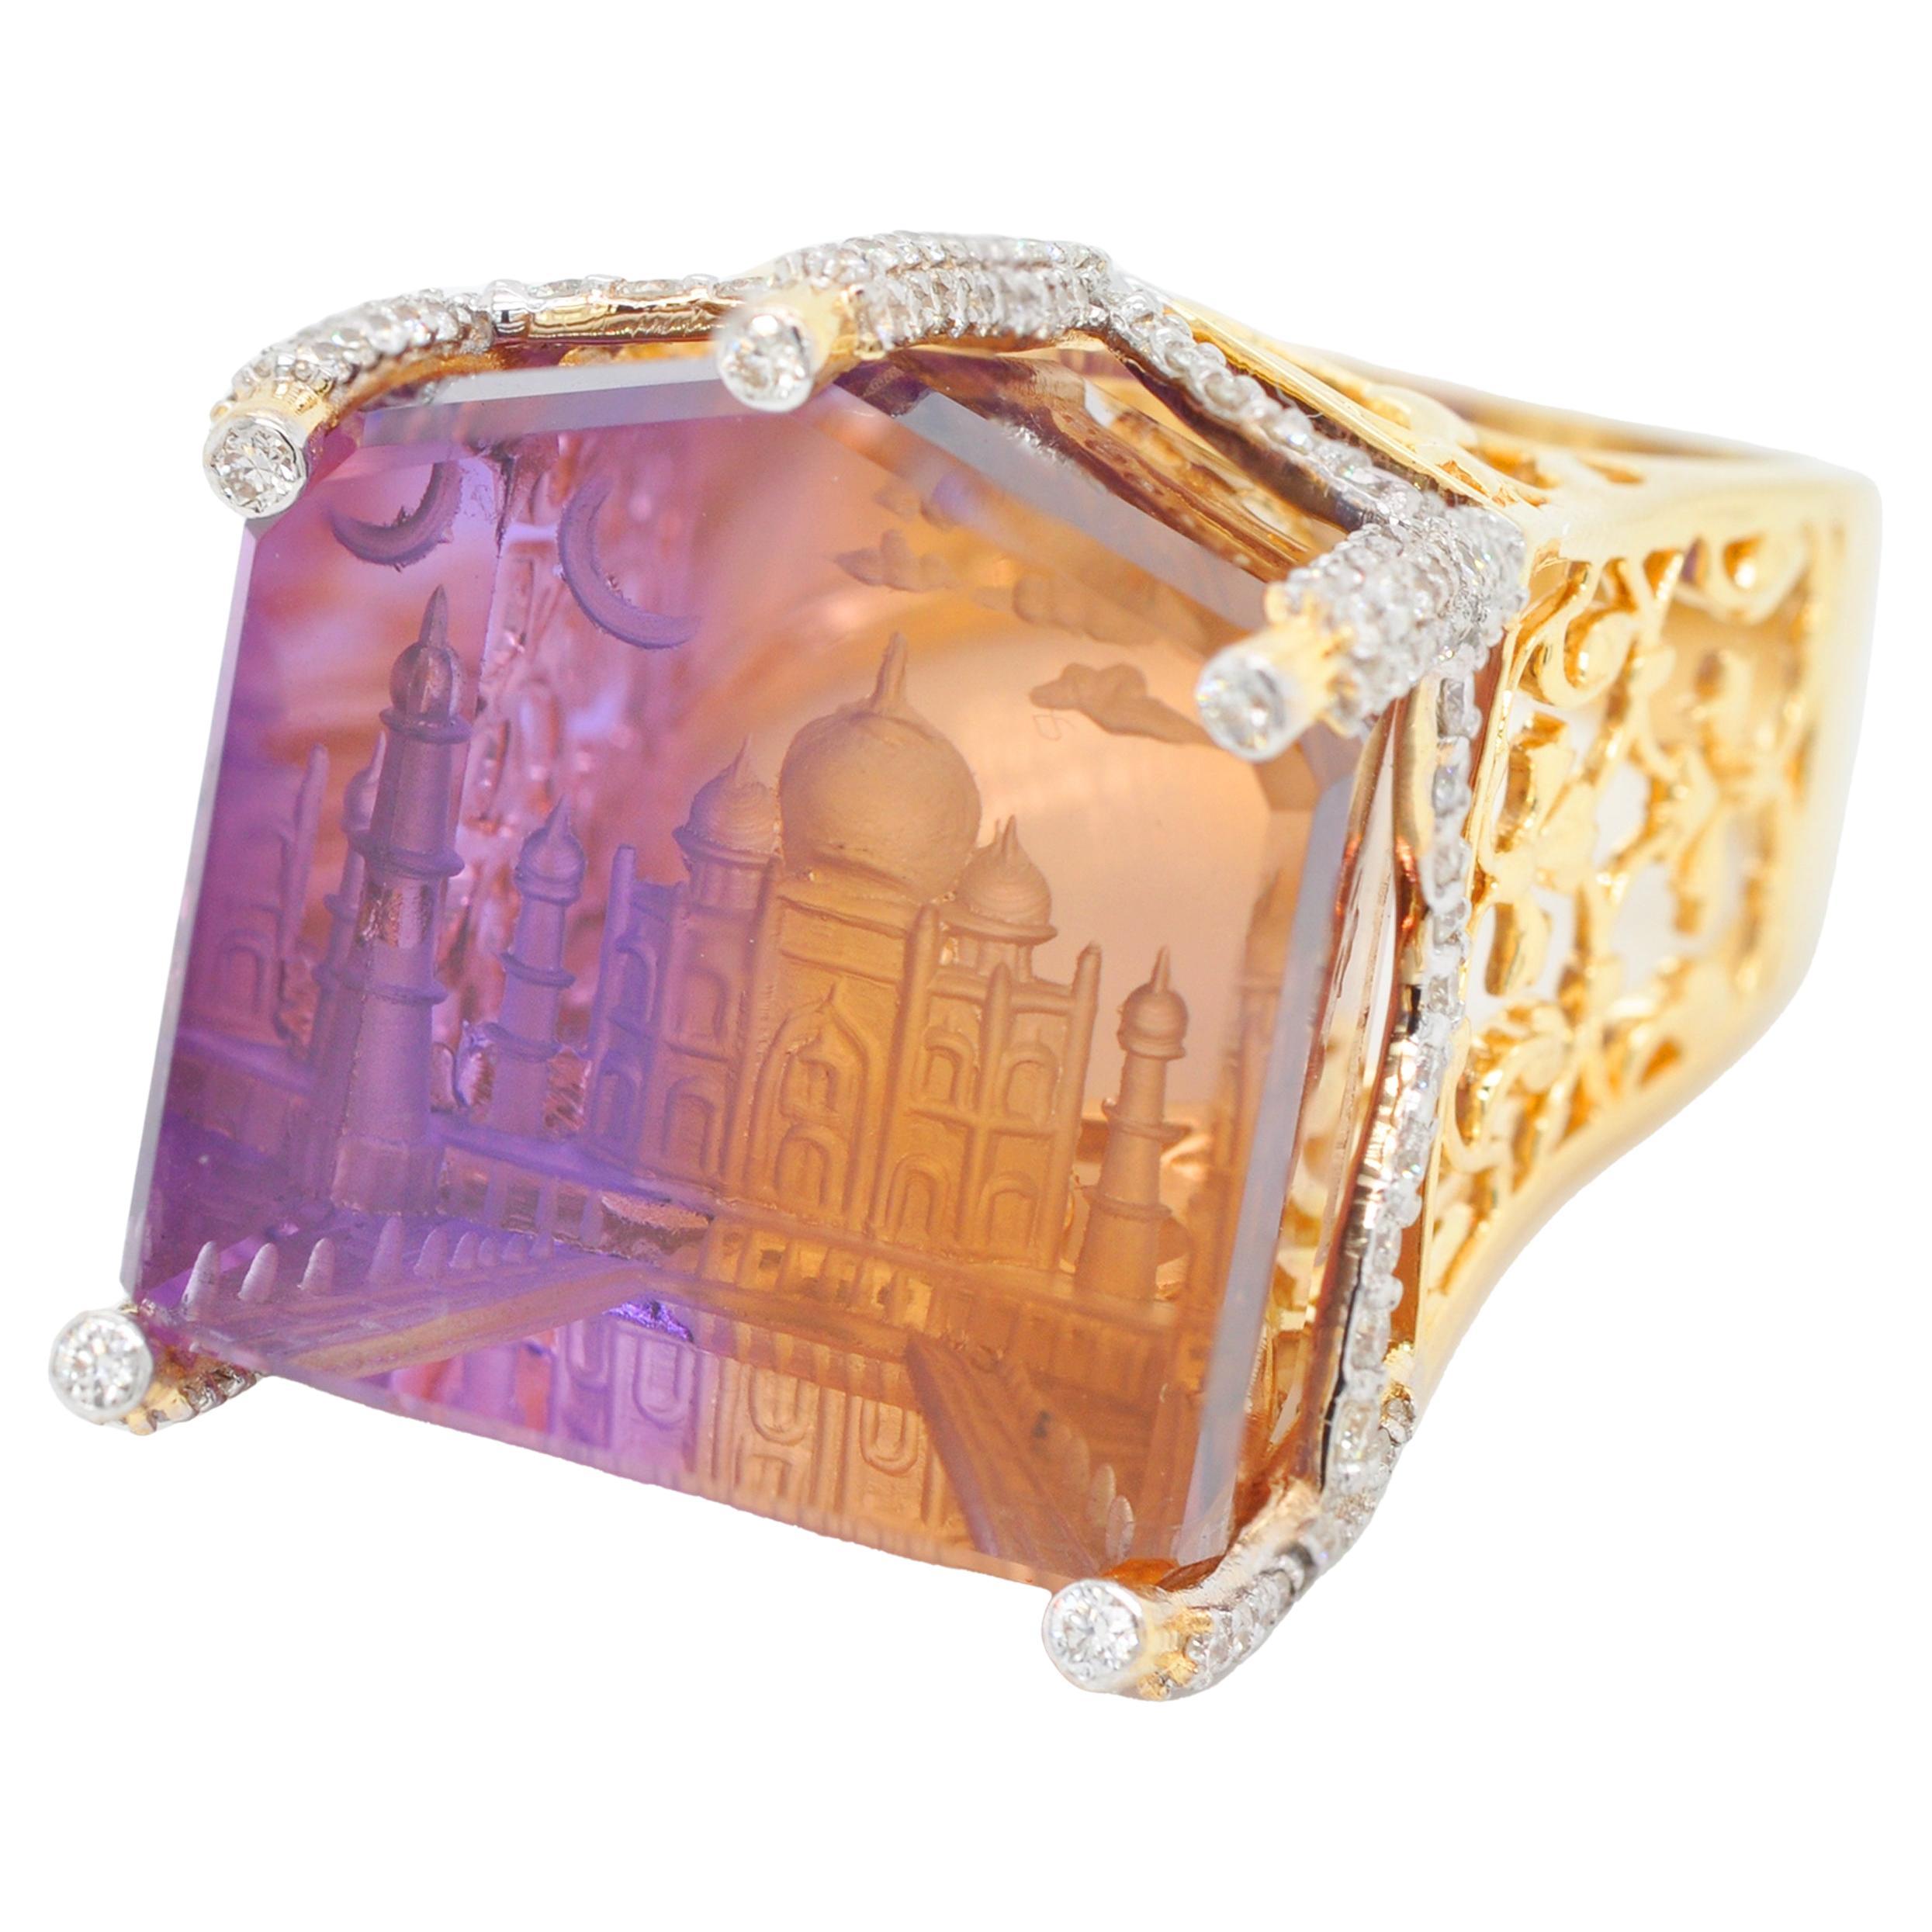 18 karat gold bolivian ametrine taj mahal intaglio undercarving diamond unique cocktail ring

Introducing the one-of-a-kind Ametrine Taj Mahal Ring, a masterpiece of artistry and craftsmanship. Set in 18K gold and adorned with diamonds, this ring